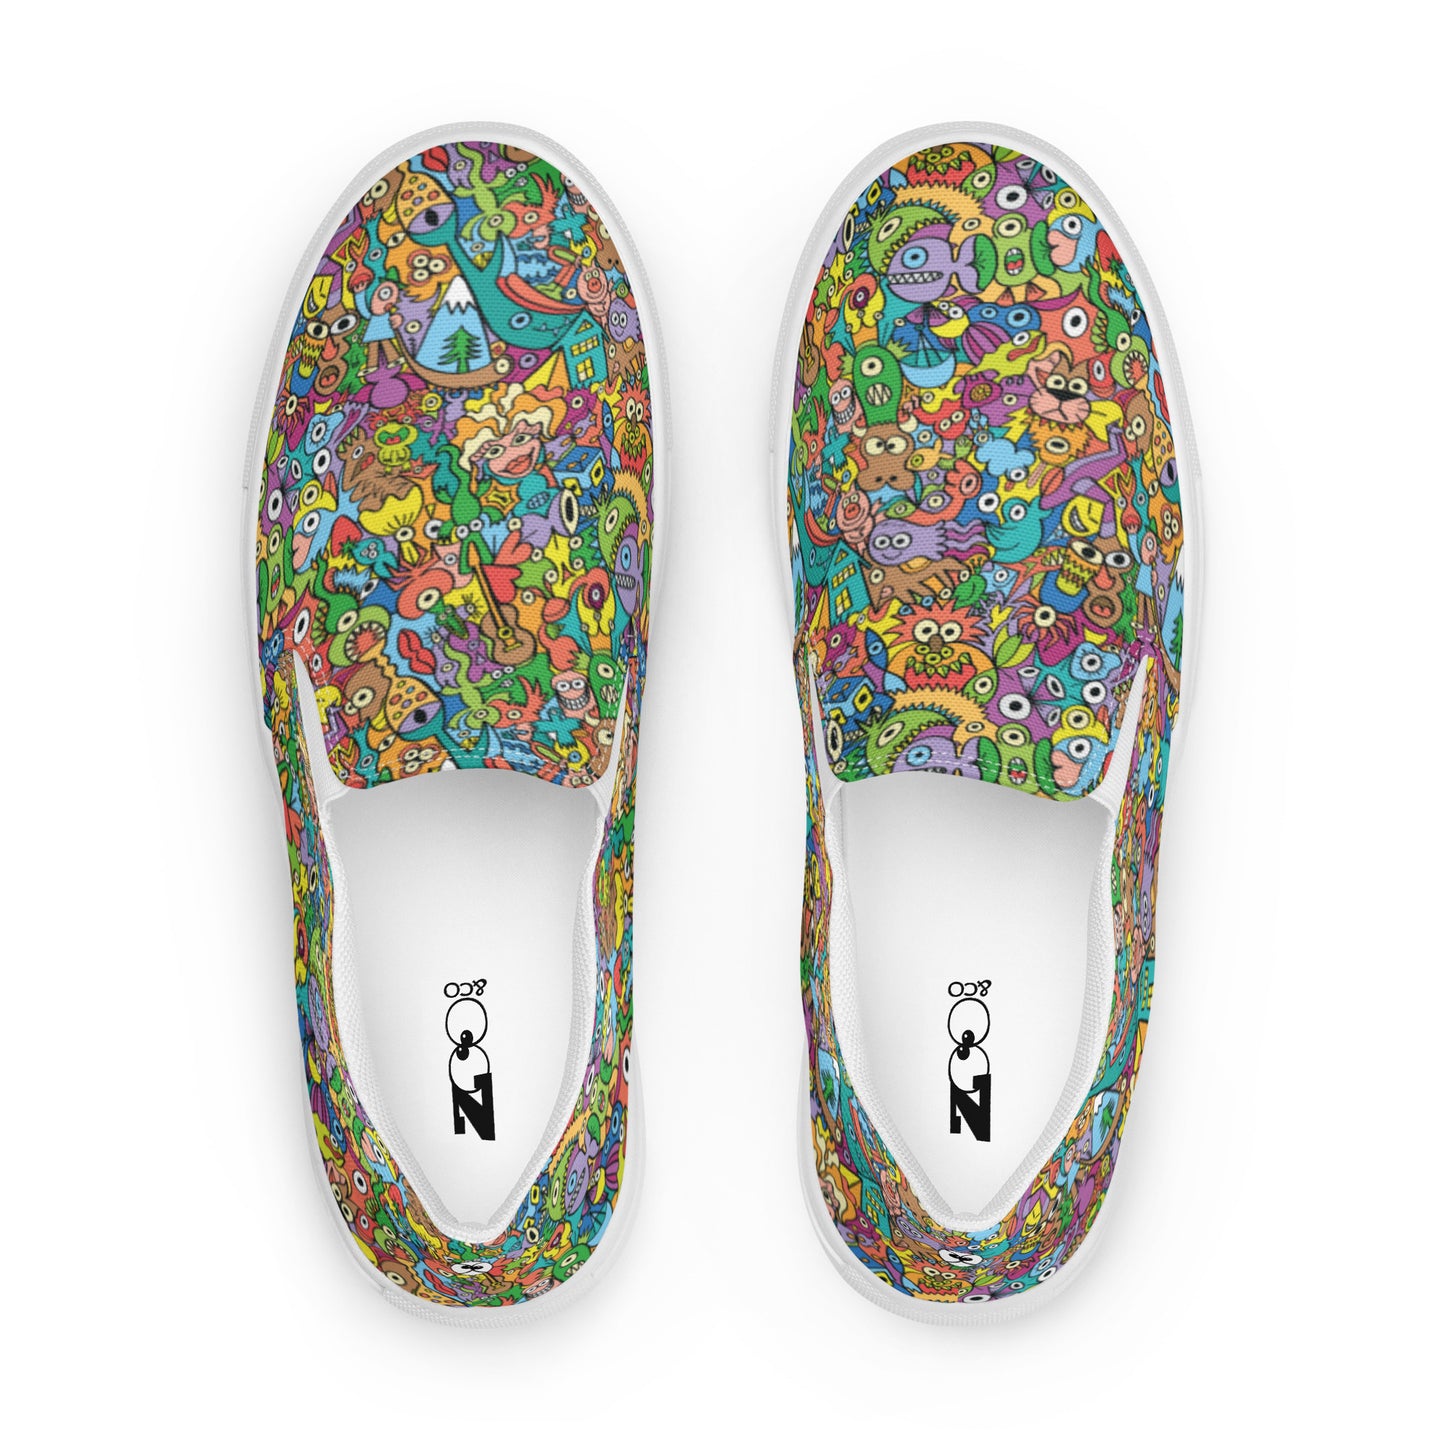 Cheerful crowd enjoying a lively carnival Men’s slip-on canvas shoes. Top view